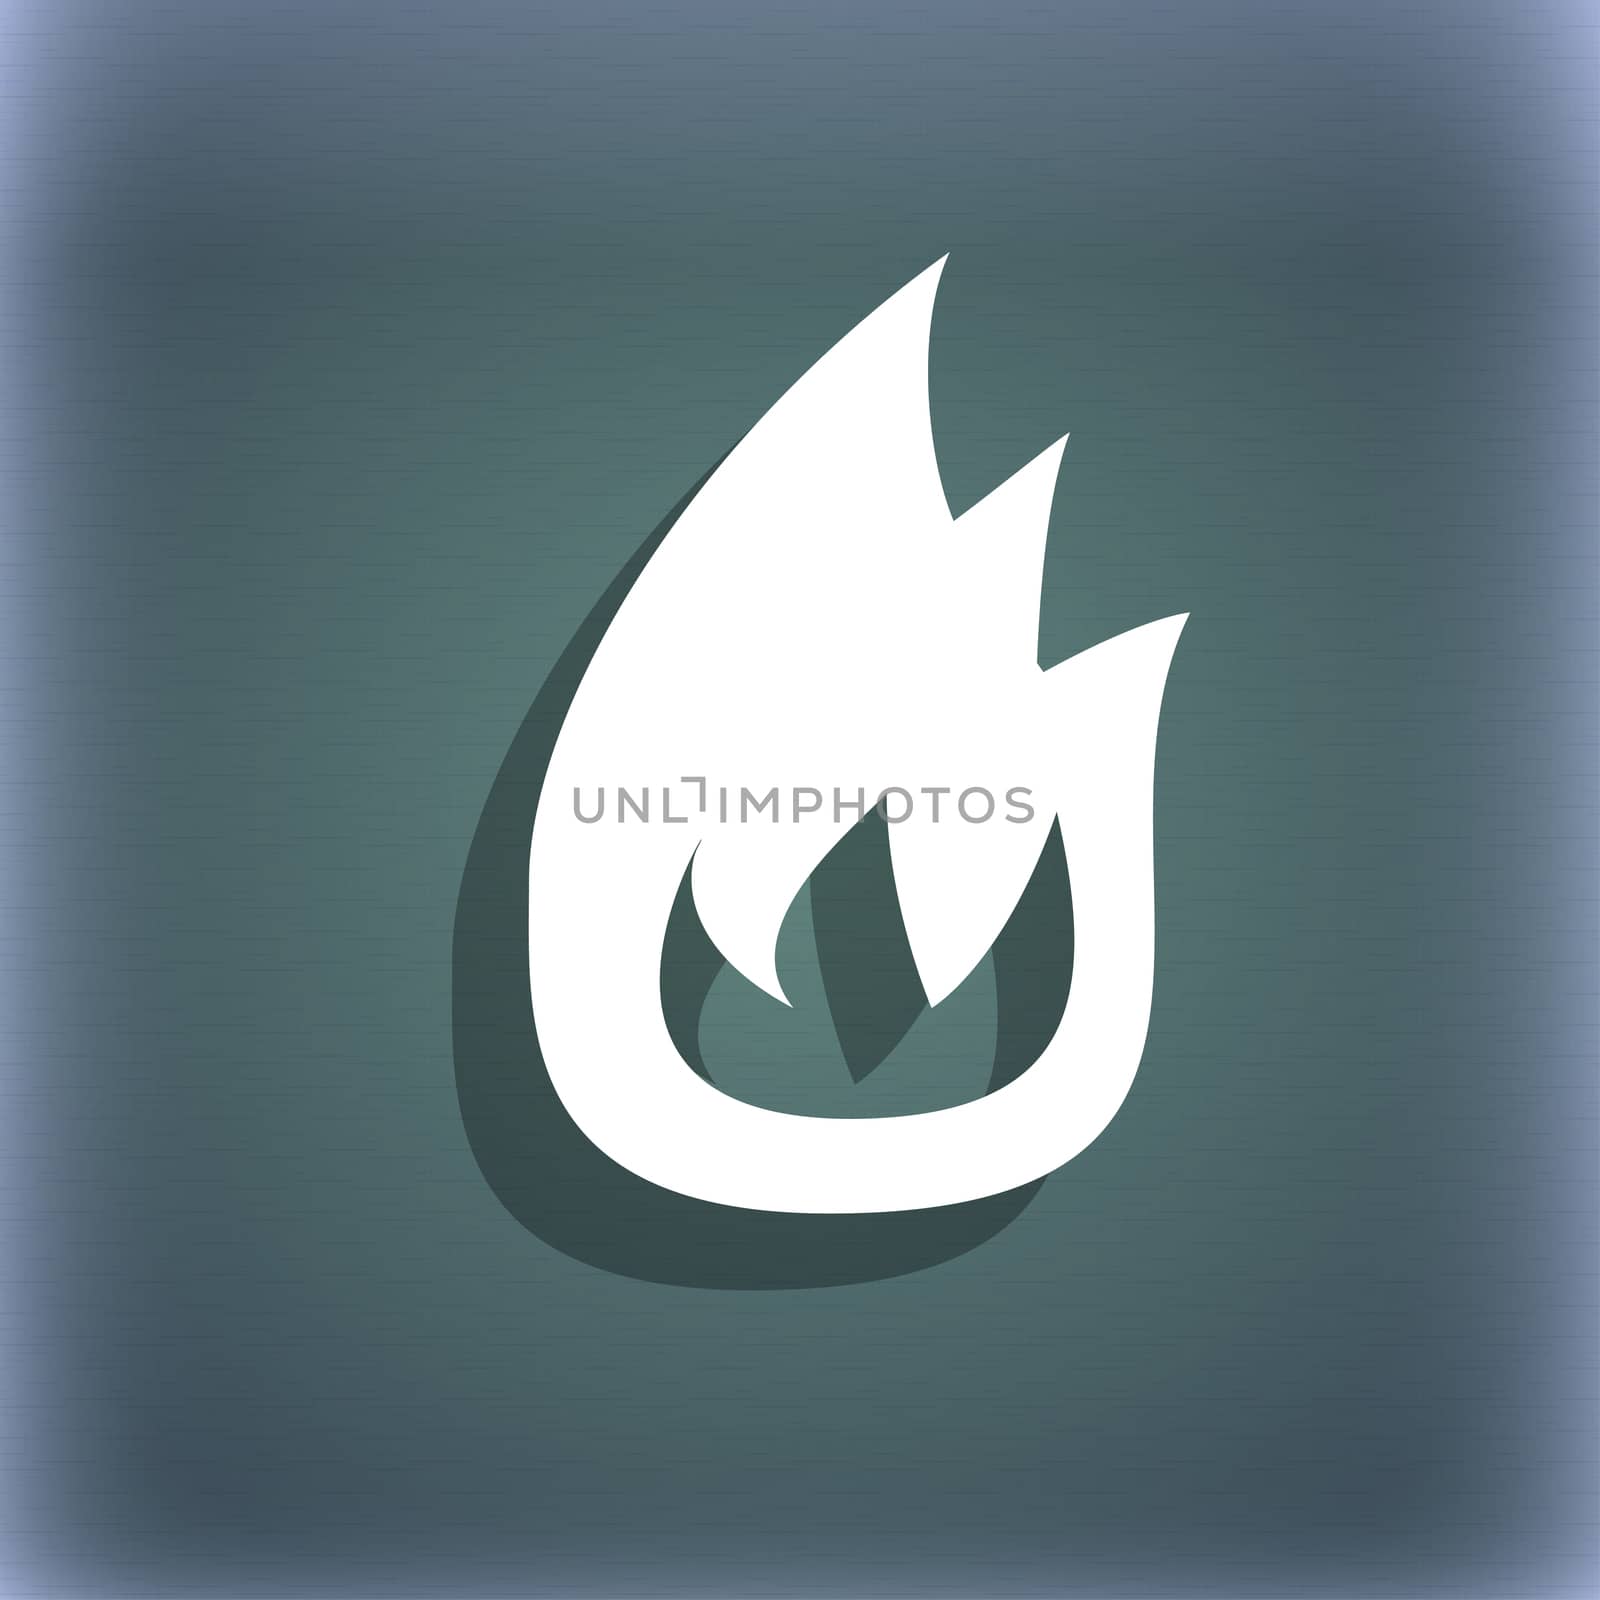 Fire flame icon symbol on the blue-green abstract background with shadow and space for your text. illustration